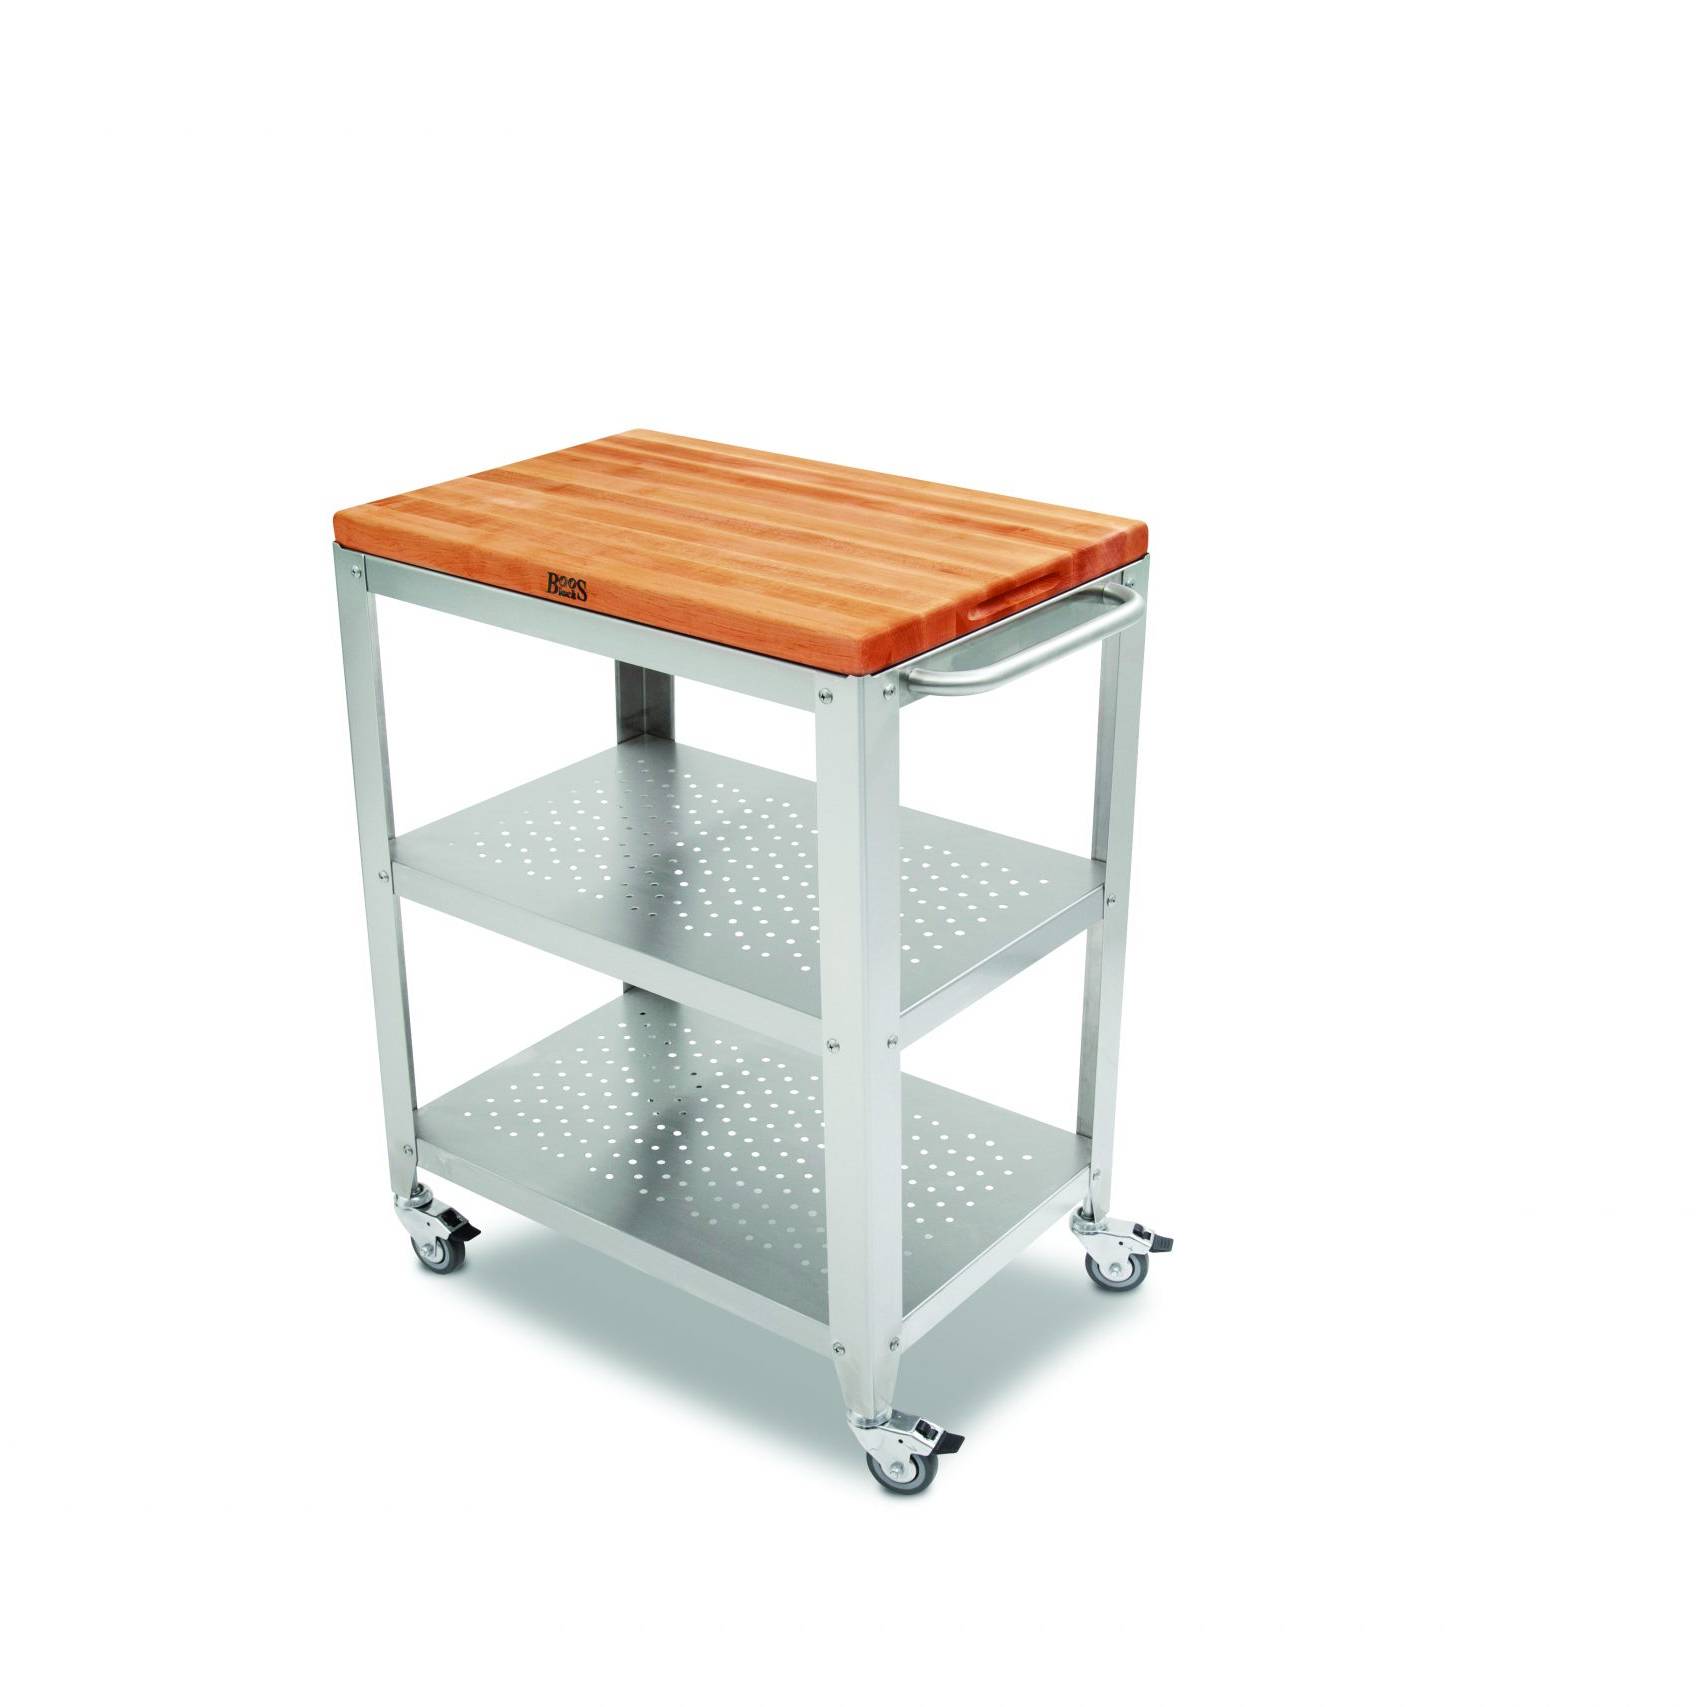 CULINARTE Kitchen &amp; serving cart with removable American Cherry long wood cutting board; stainless steel base with drawer and 2 shelves, towel rack; lockable casters 3